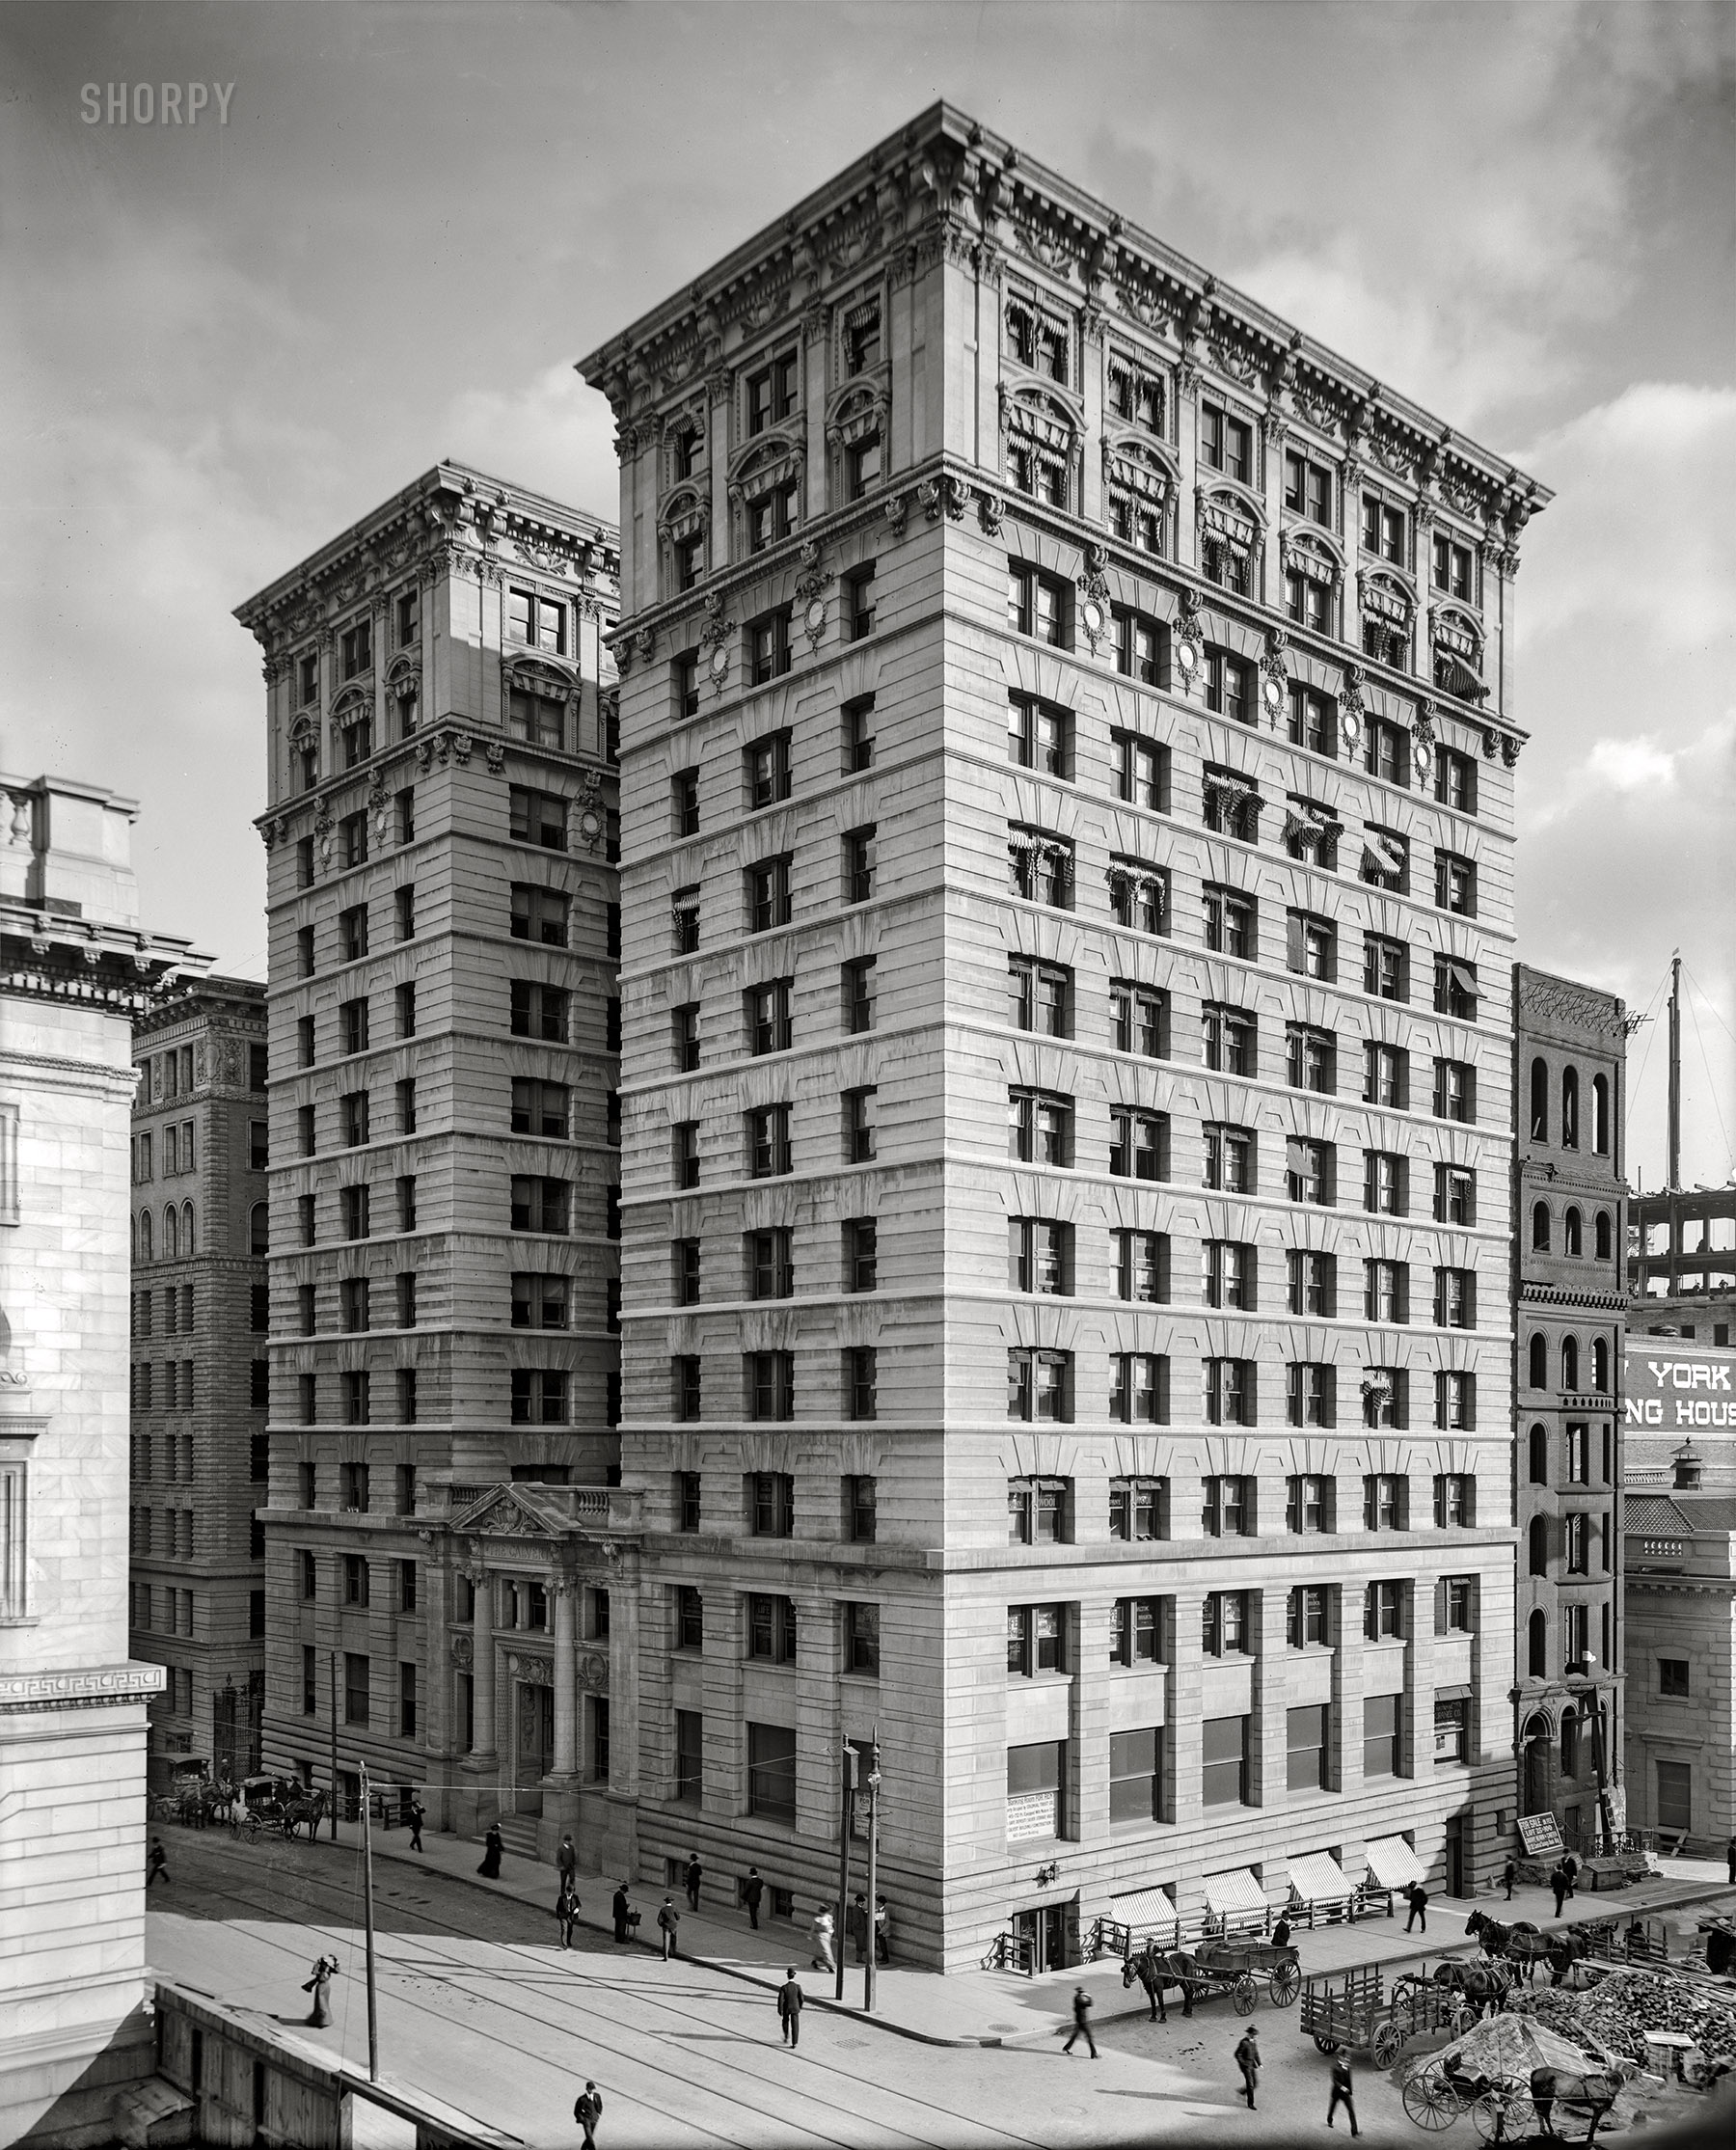 Baltimore circa 1906. "The Calvert Building, Fayette and St. Paul Streets." Completed in 1901; demolished in 1971. 8x10 inch glass negative, Detroit Publishing Company. View full size.